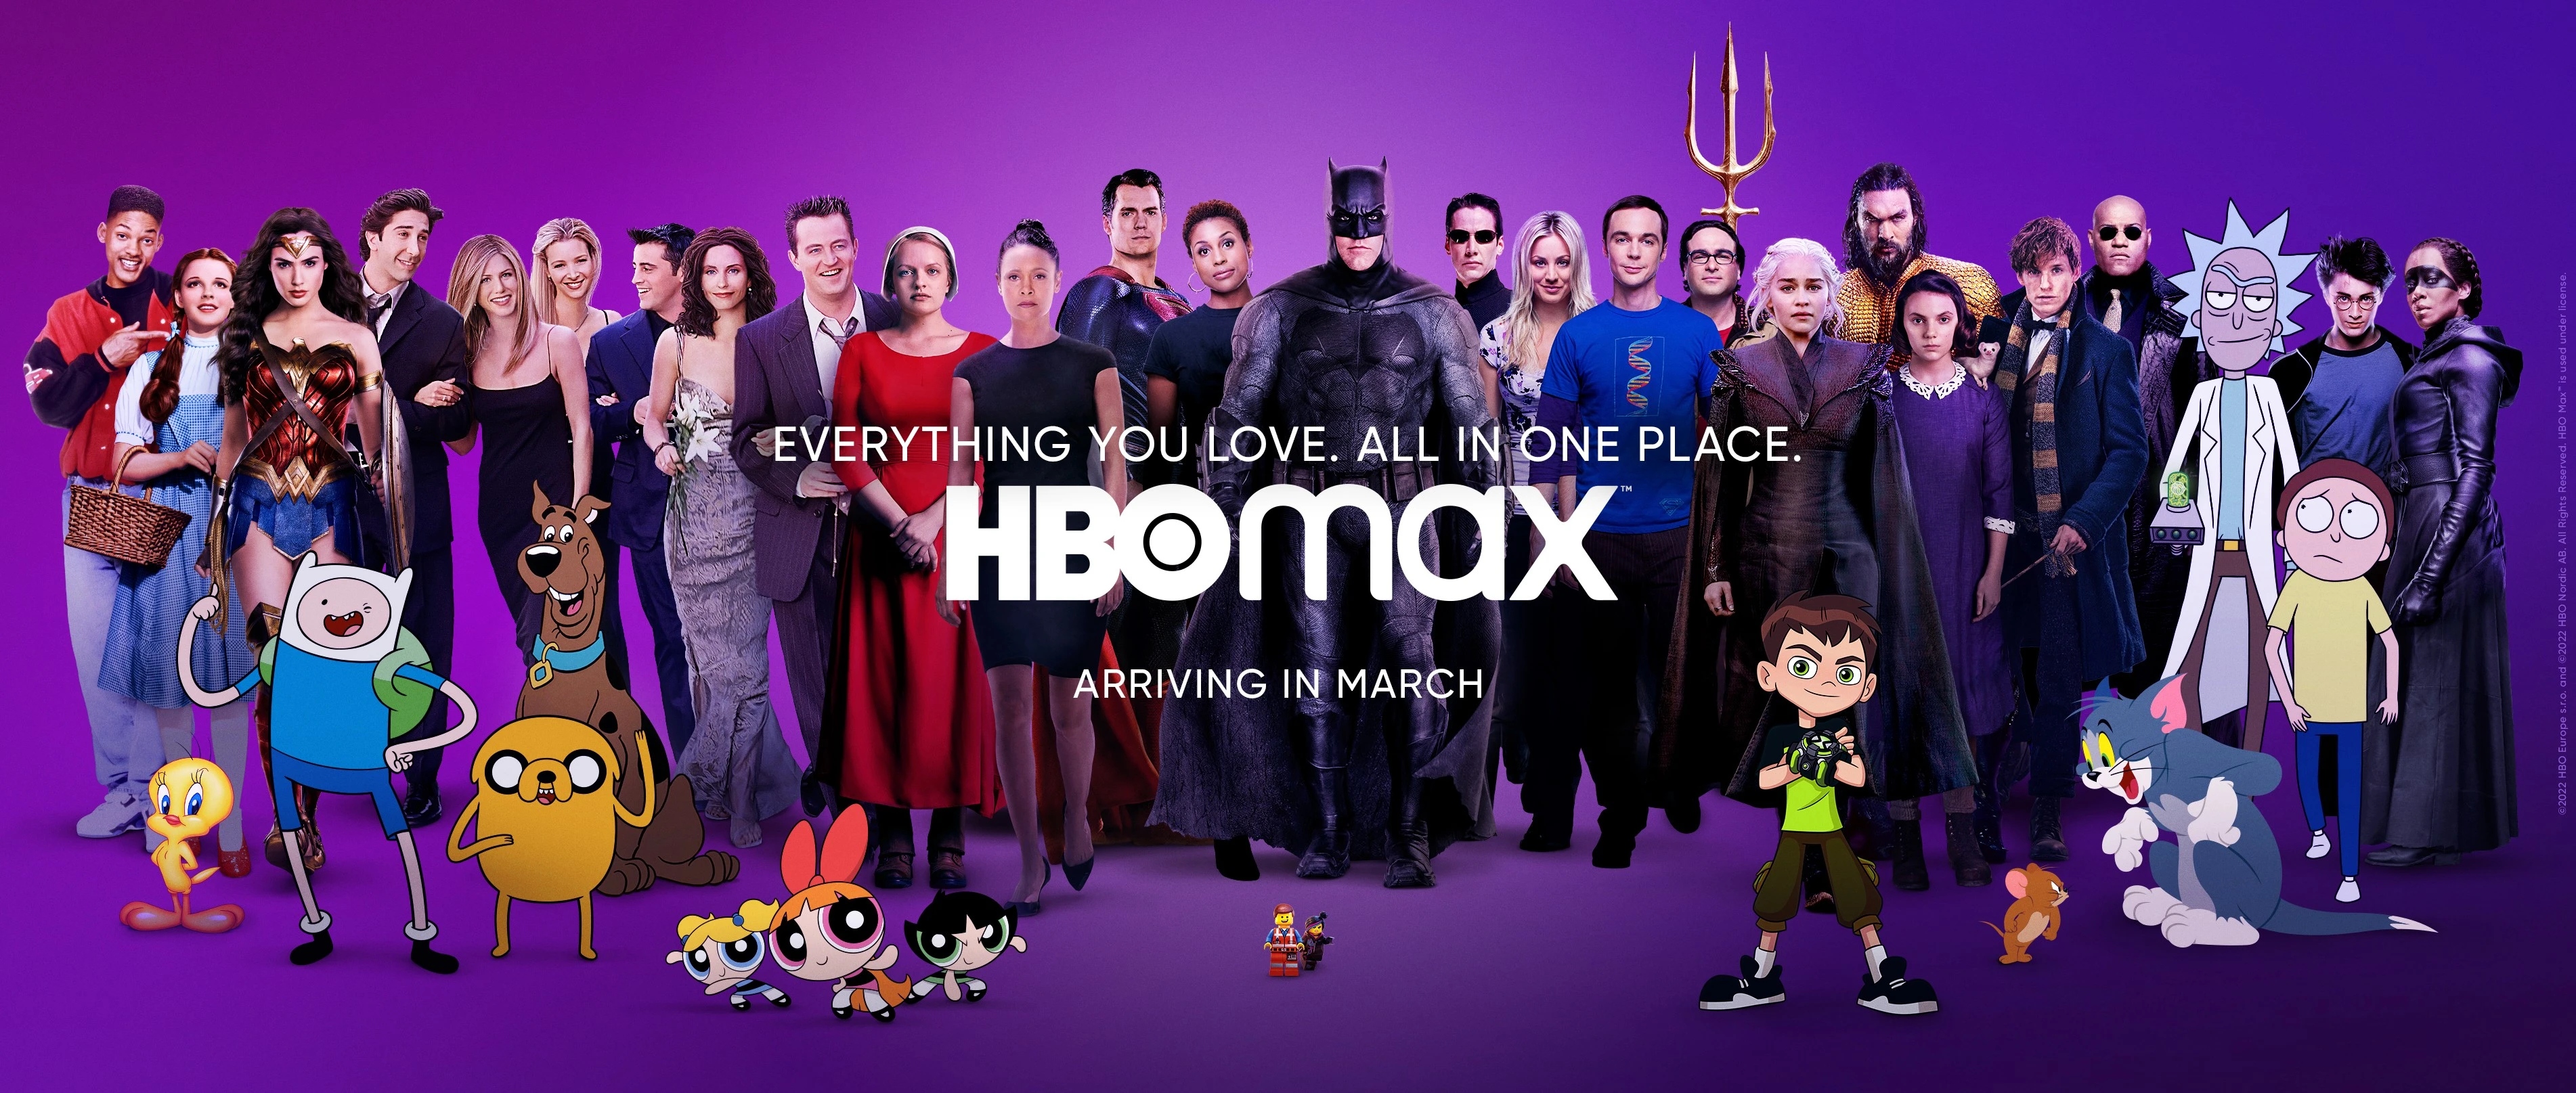 HBO Max poster